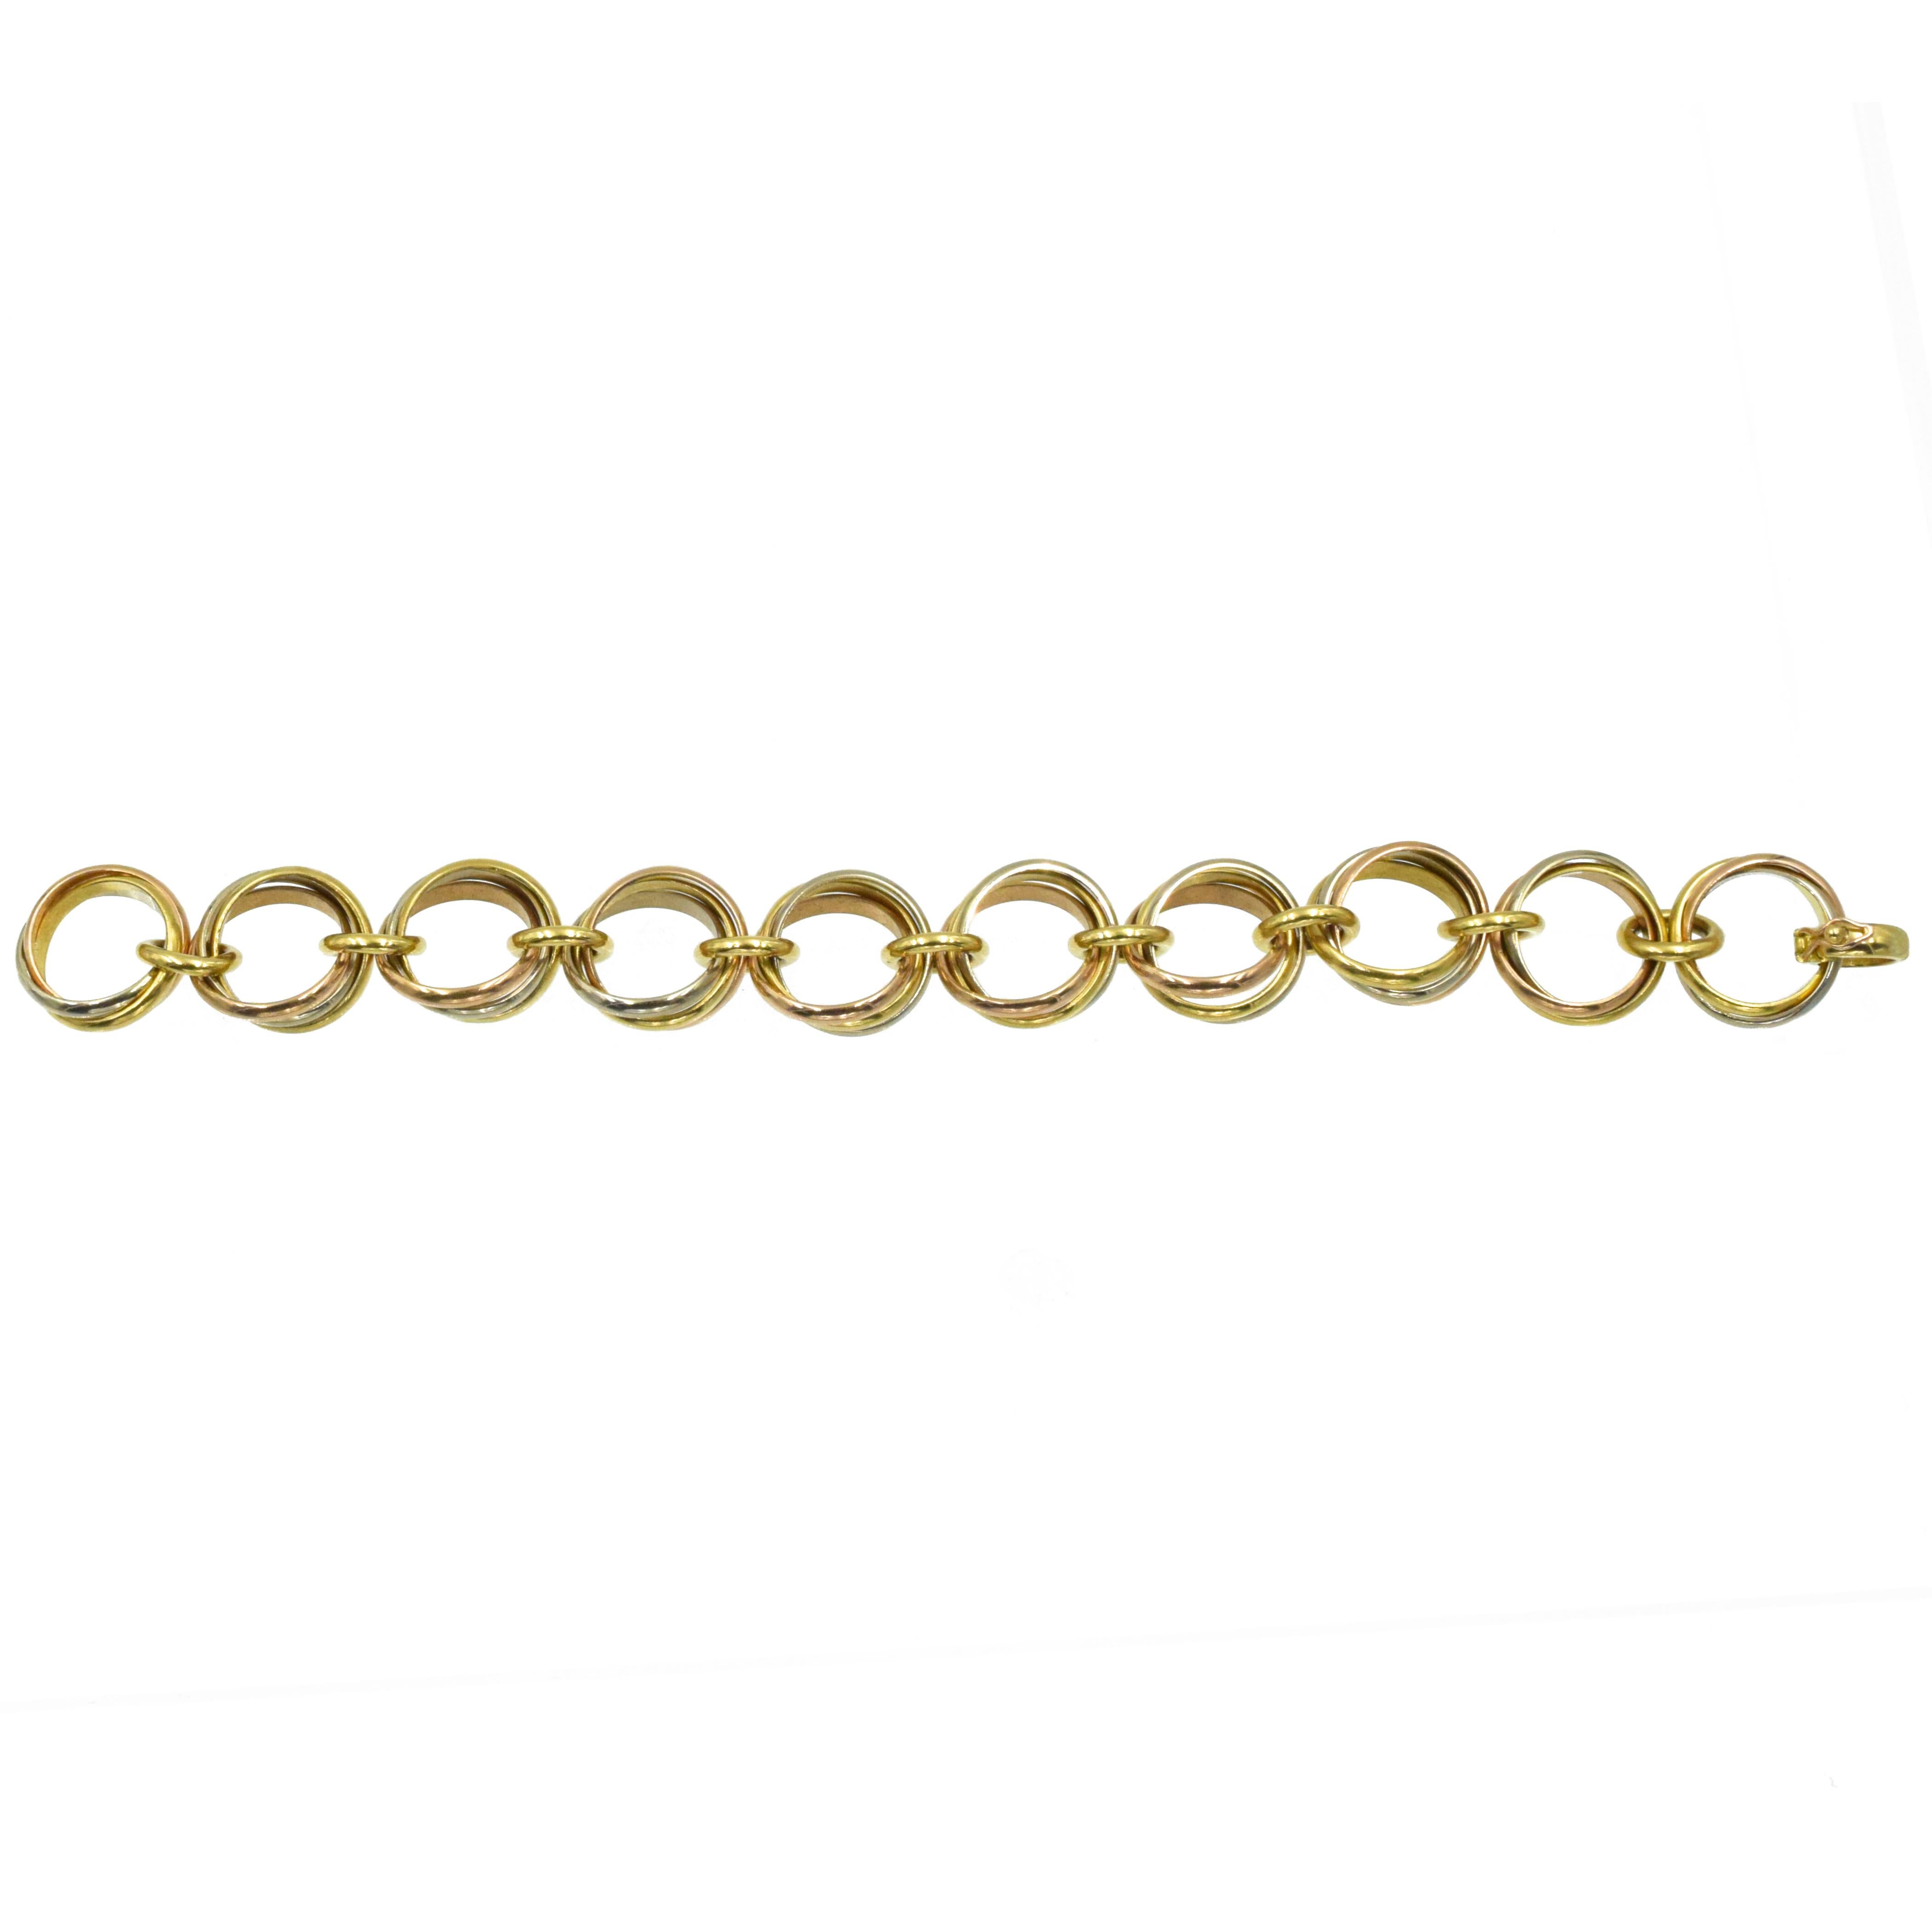 Cartier 'Trinity' Tri- Colored Link Bracelet. This bracelet has 10 'trinity' motif links made of 18k yellow, white, and pink gold connected by 18k yellow gold circular links and clasps with security lock. Signed Cartier, 1991, Serial No. B49693.